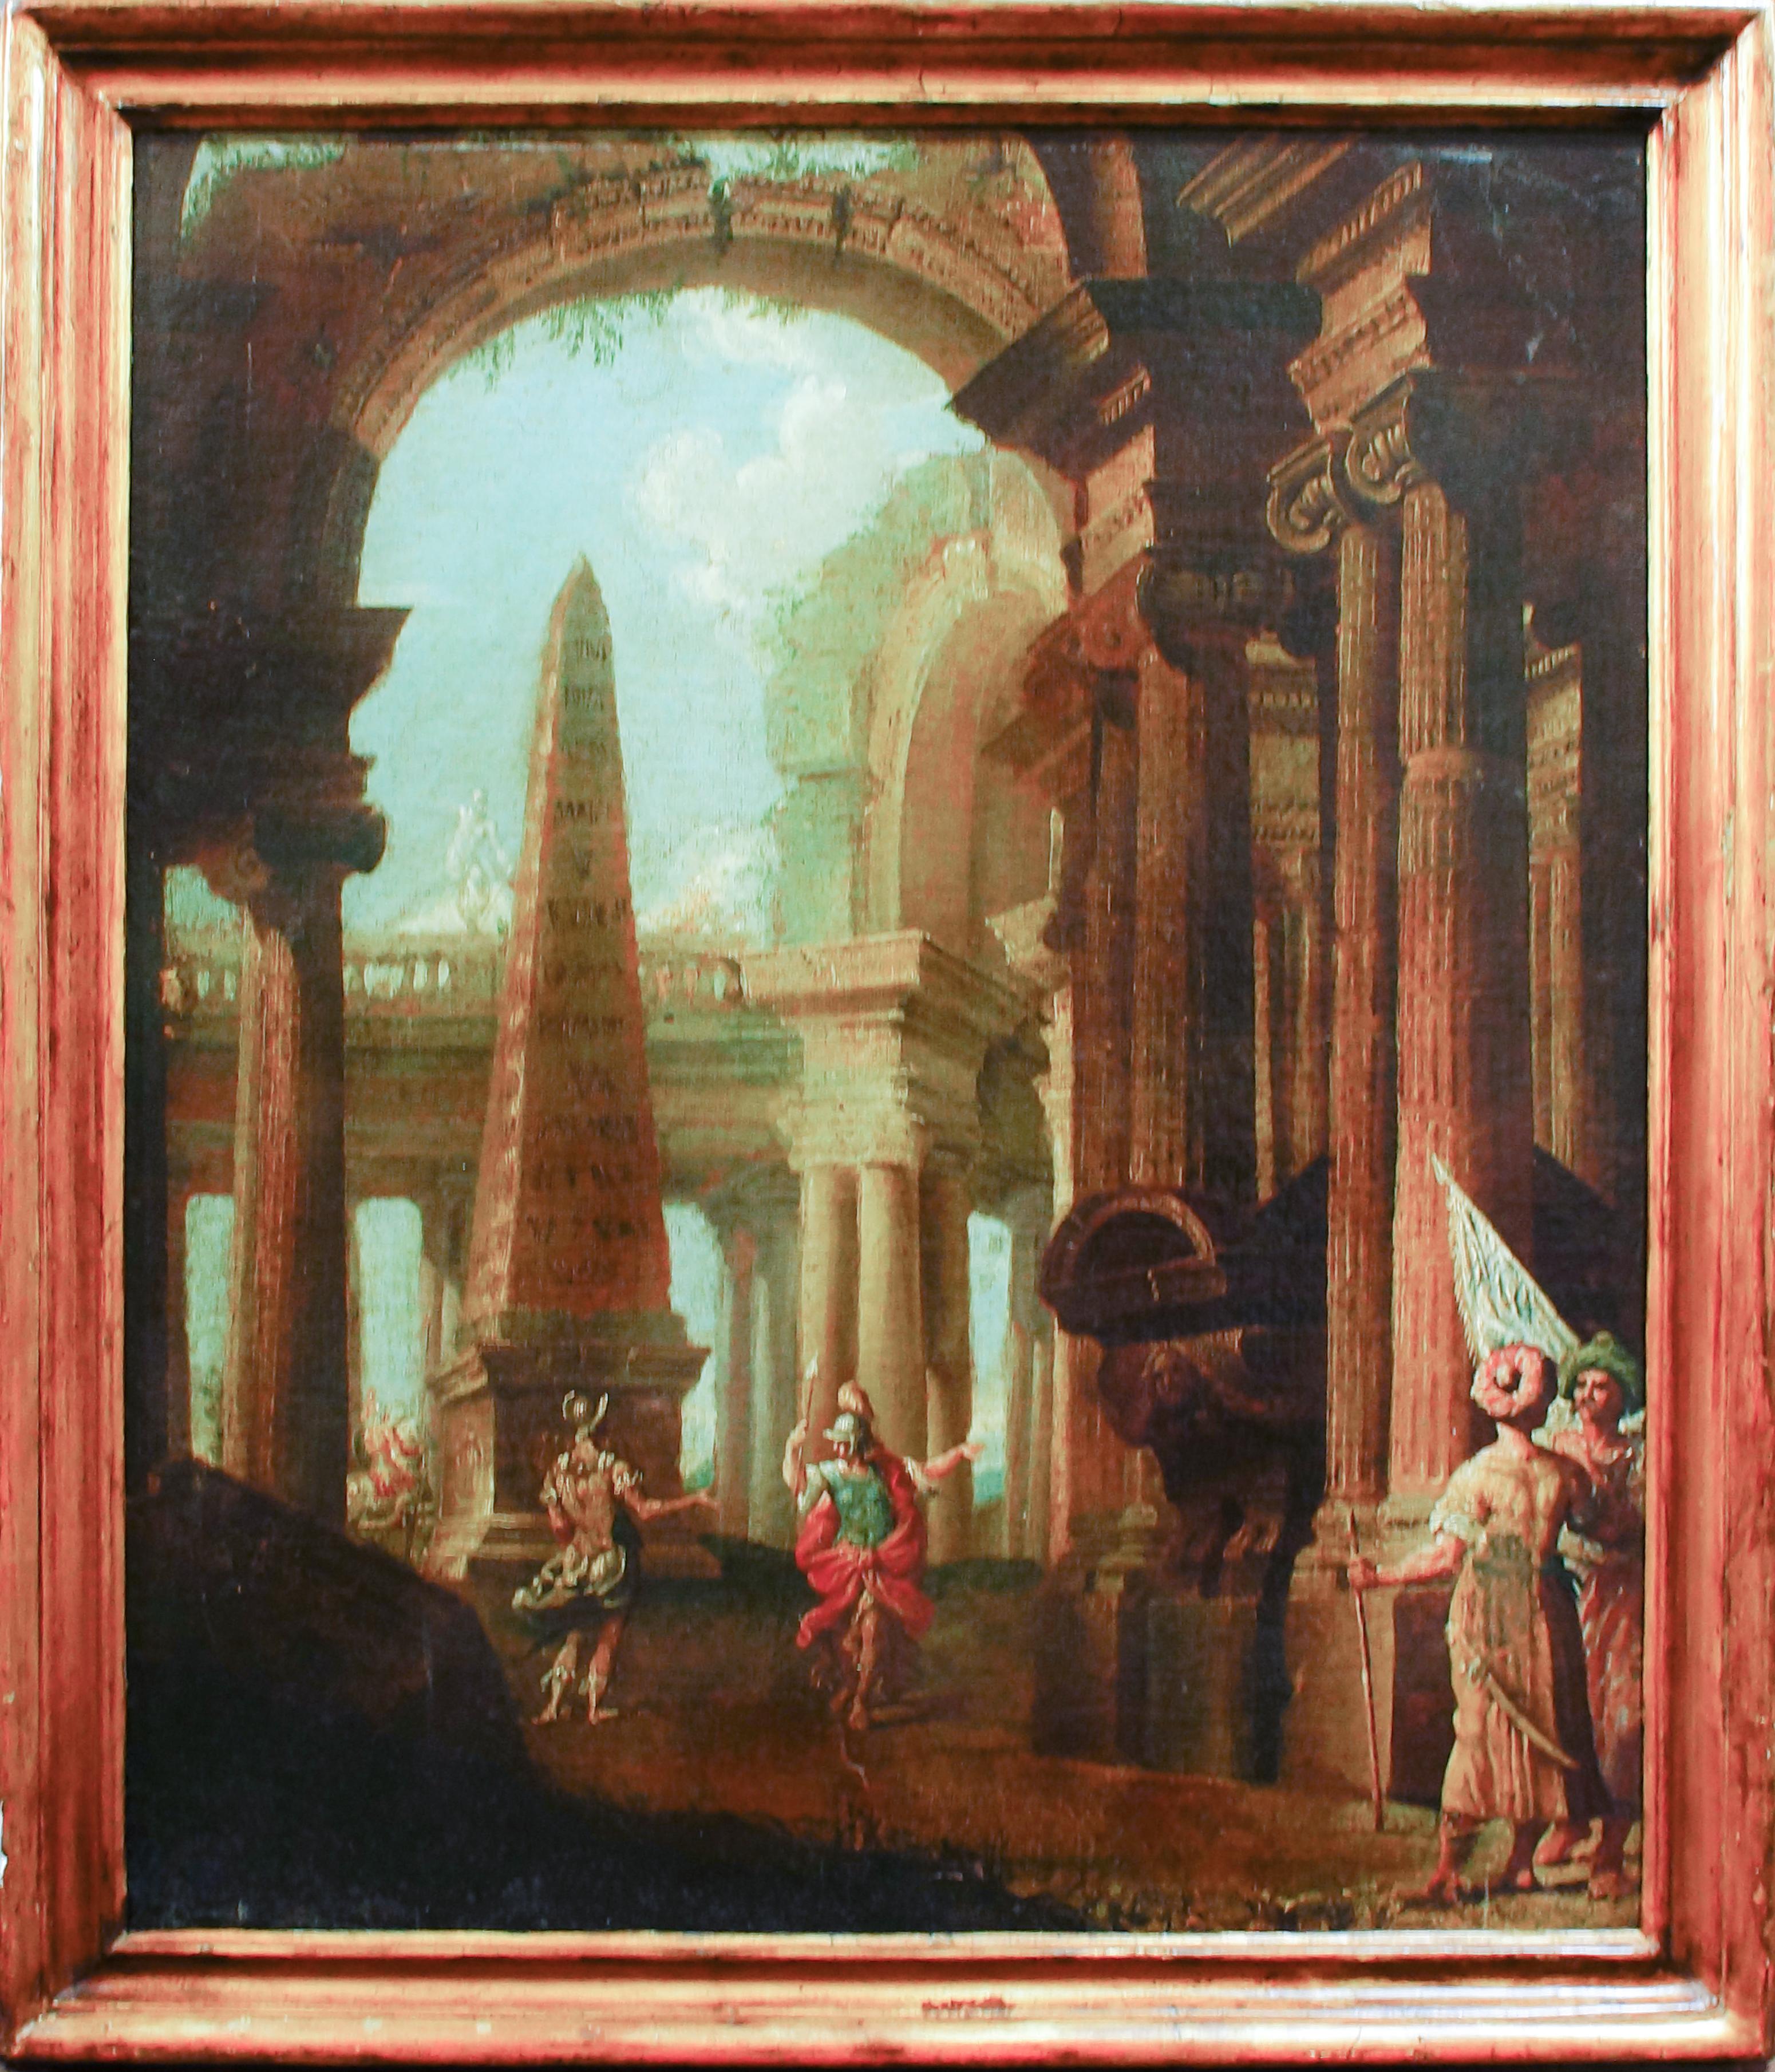 Capriccio with Ruins is an original artwork realized by a painter from the circle of Alberto Carlieri of the Italian School of the XVII century.

Oil on canvas.

Frame included (84 x 72 cm).

Good conditions, except for very light foxing on the